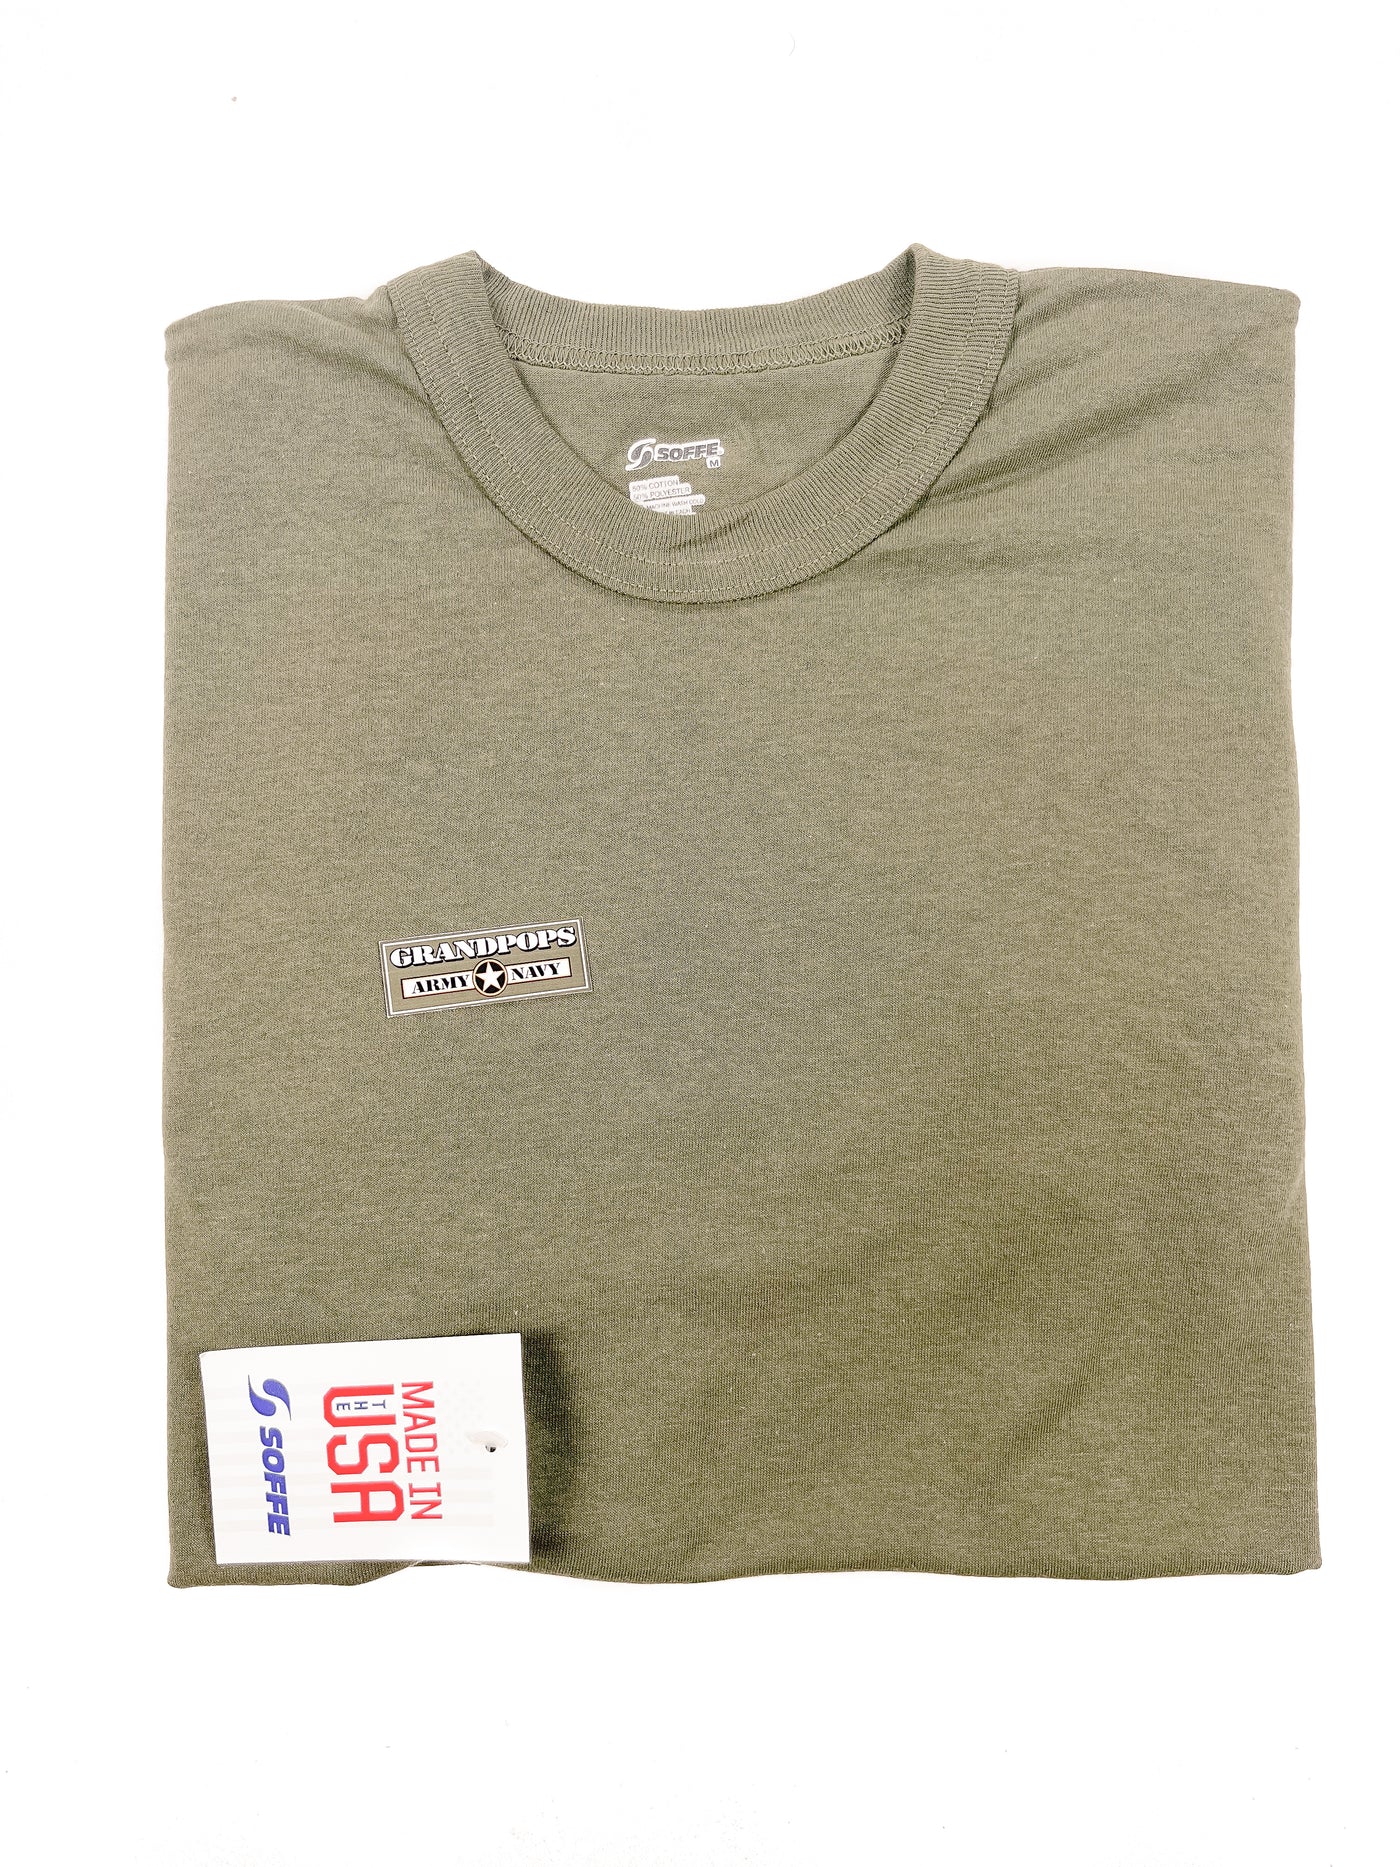 Coyote Tan Unisex Shirt. This shirt is NOT approved for PT